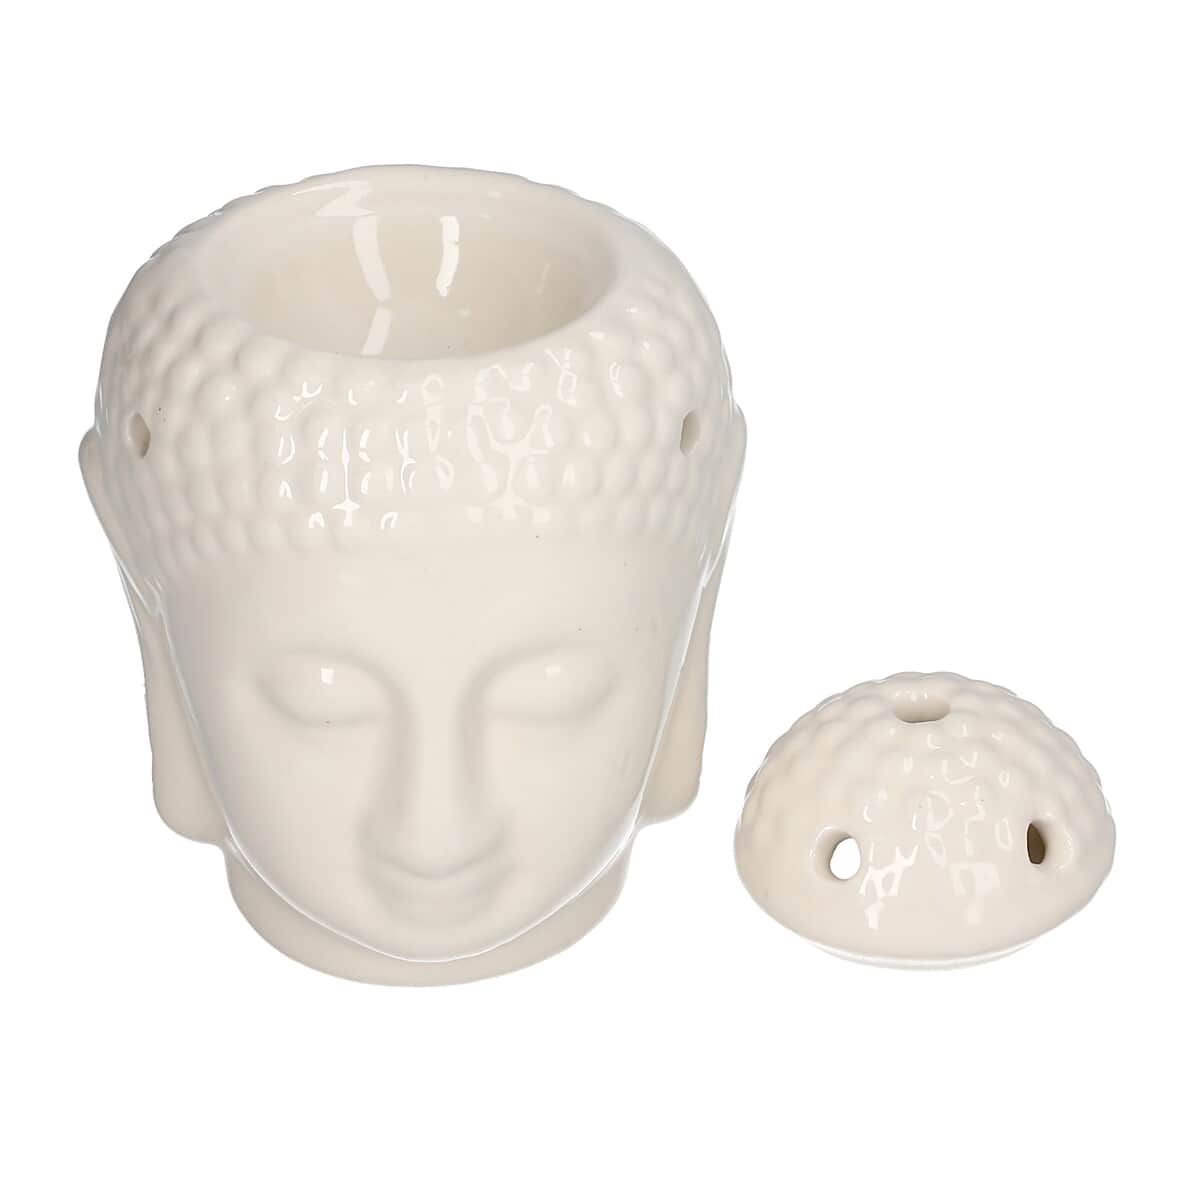 Beige Ceramic Buddha Head Tealight Candle Holder with Aromatherapy Oil Burner image number 4